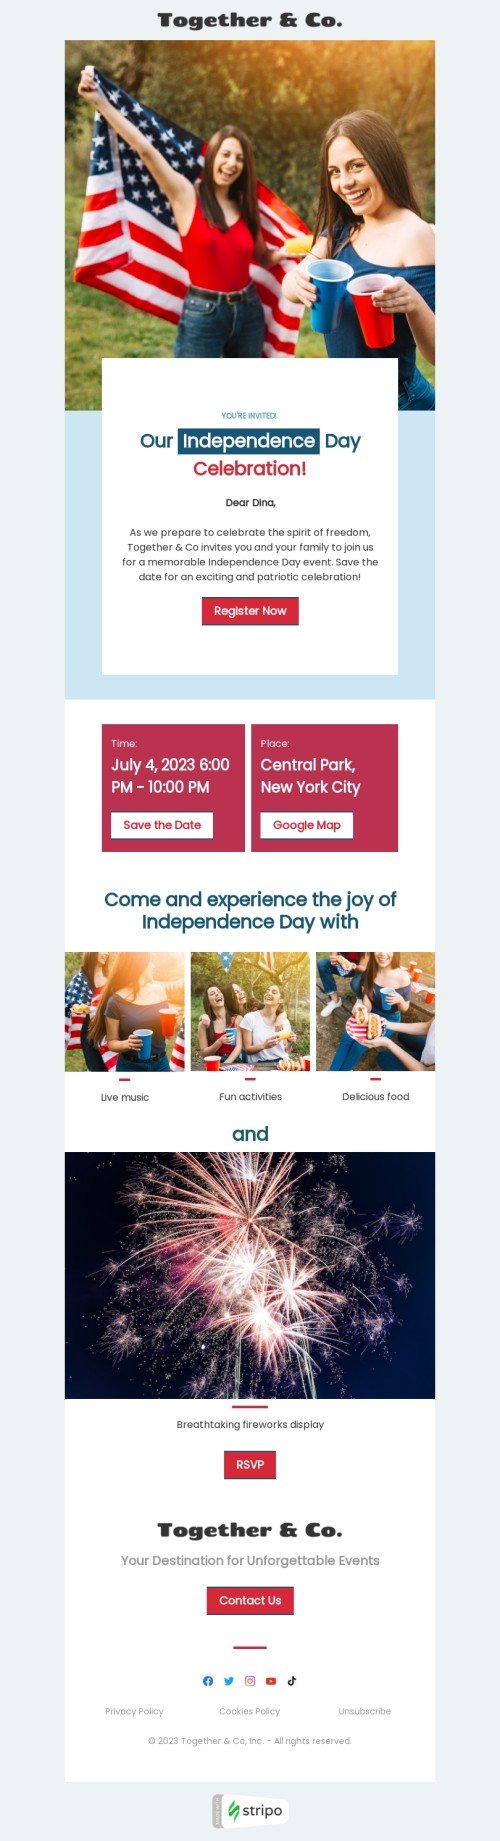 Independence Day email template "Celebrate the spirit of freedom" for hobbies industry desktop view